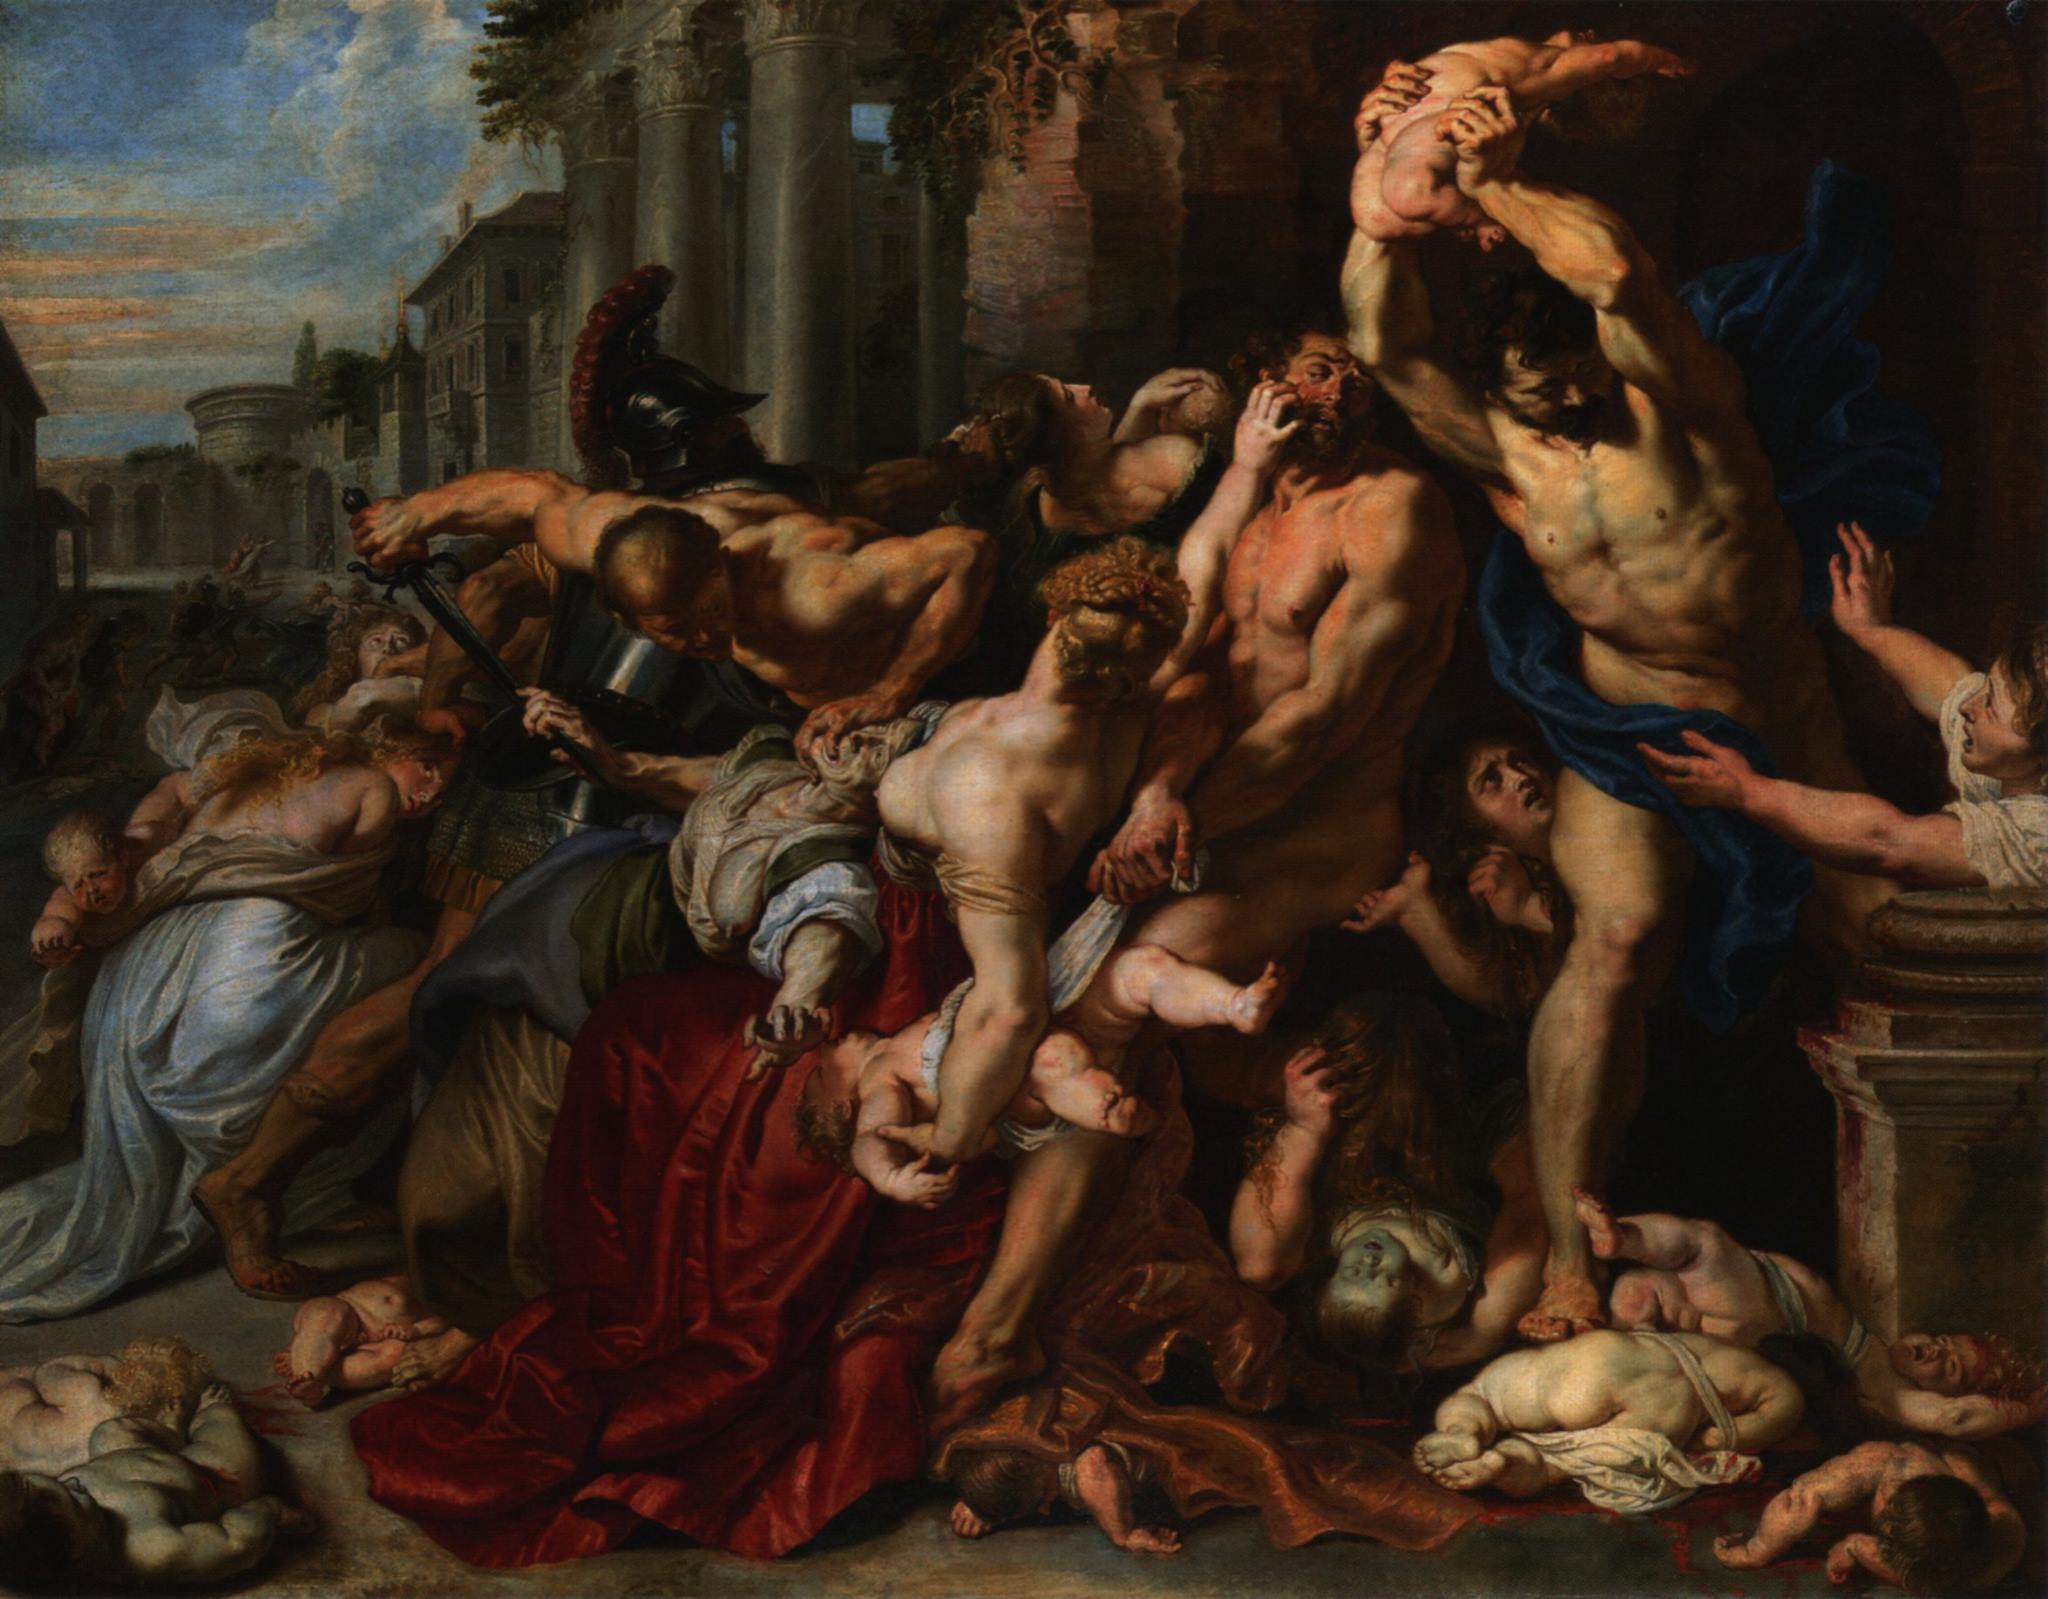 Massacre of the Innocents by Peter Paul Rubens (1612)